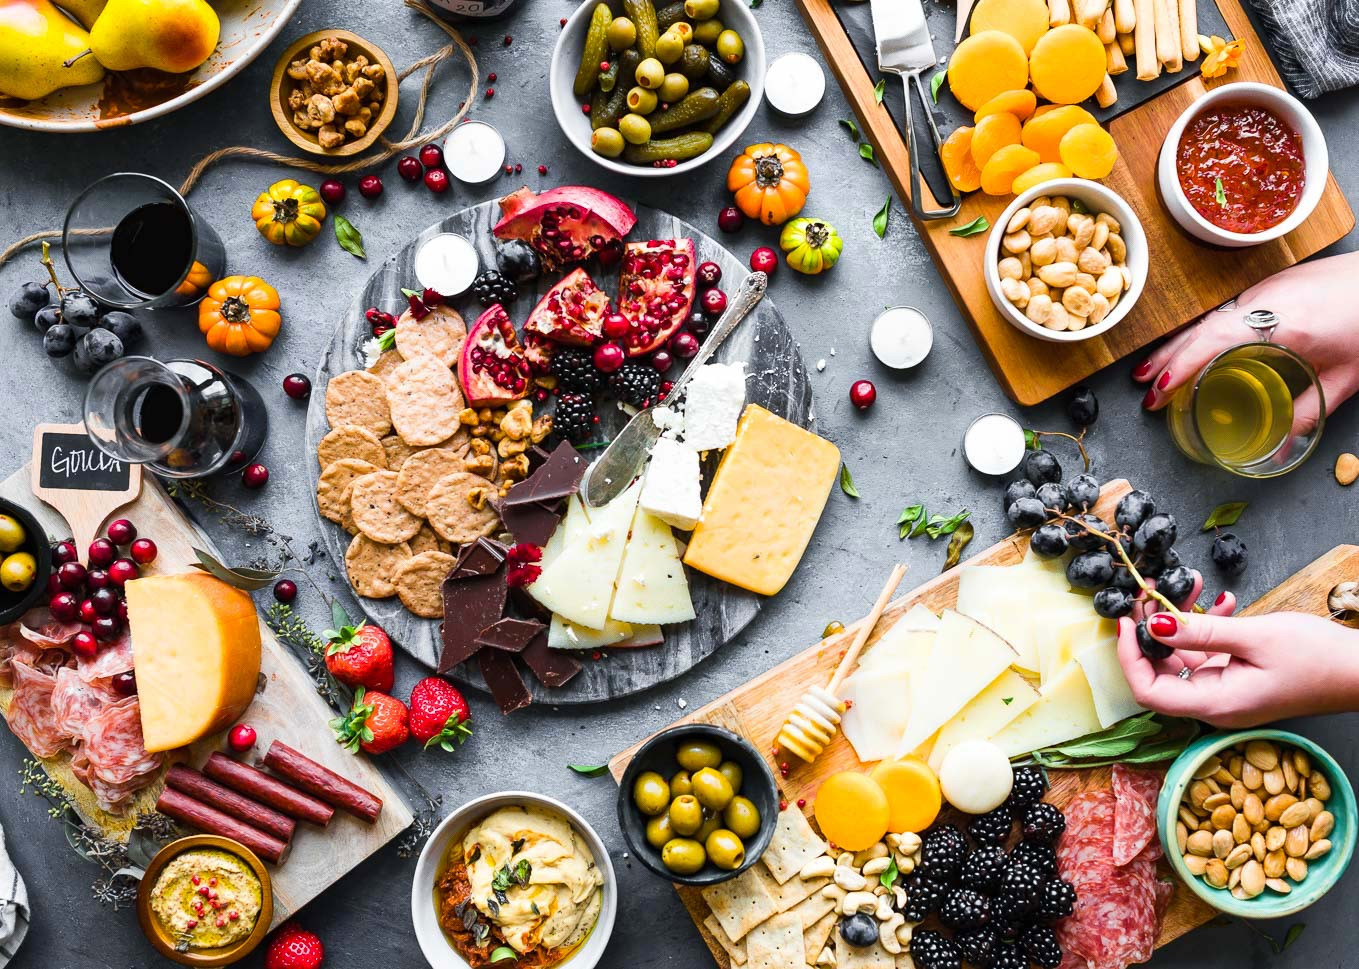 Wine Party Food Ideas
 How to Host an Impromptu Wine and Cheese Party